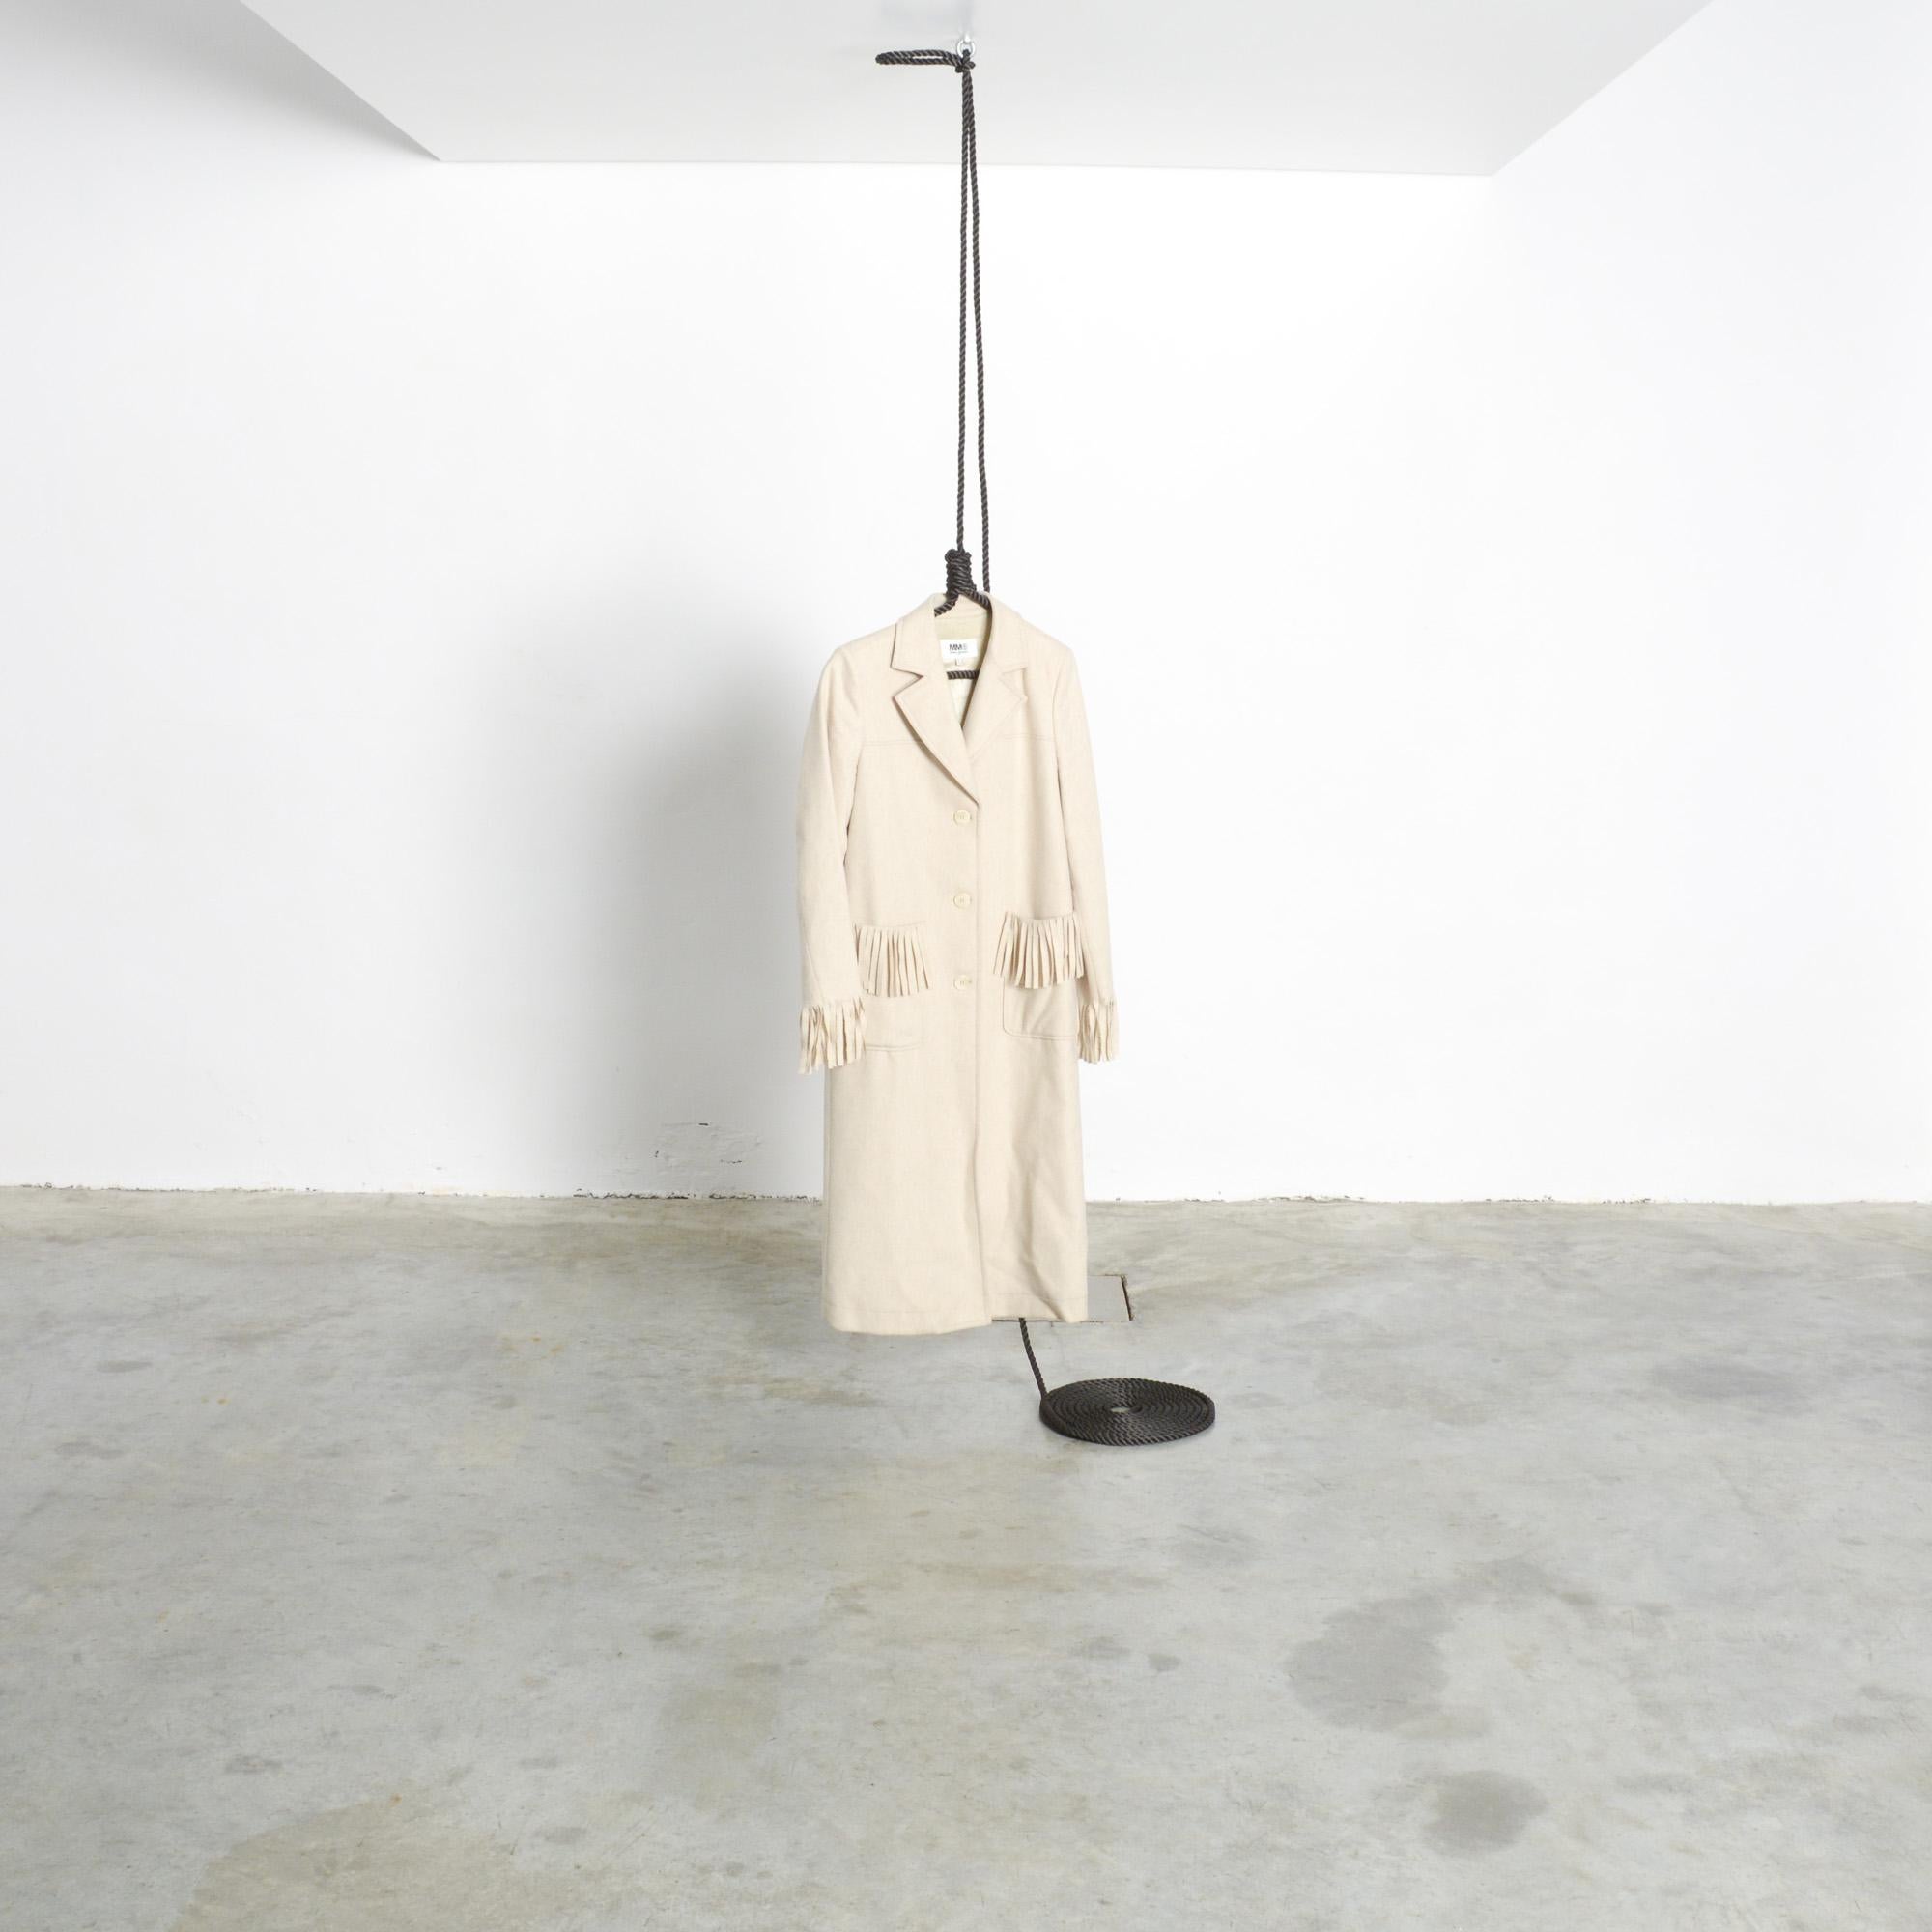 The Hanger.01 has a design that requires very little explanation. A hanger with a clear nod to a noose, made of flax, reinforced with a steel core and available with a pulley.
This is a collaborative design between Lennart ALBERT Van Uffelen and